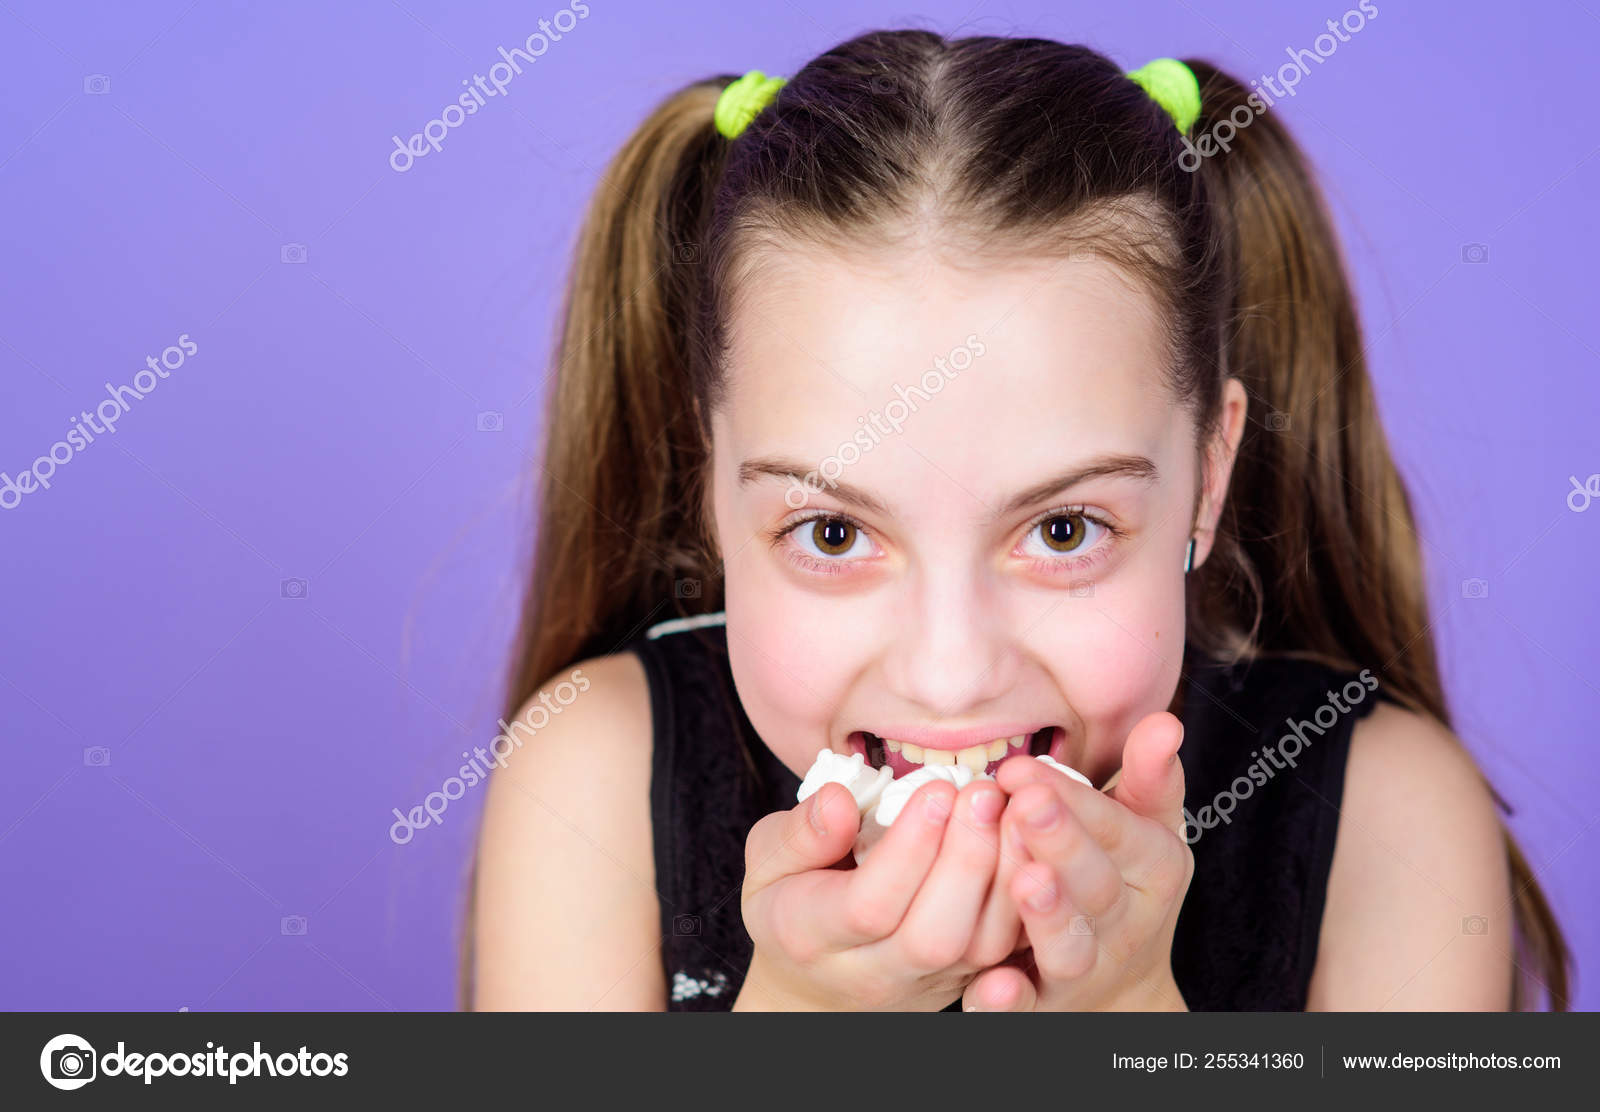 Incorrigible Sweet Tooth Girl Smiling Face Holds Sweet Marshmallows In Hand Violet Background Sweet Tooth Concept Kid Girl With Long Hair Likes Sweets And Treats Calorie And Diet Hungry Kid Stock